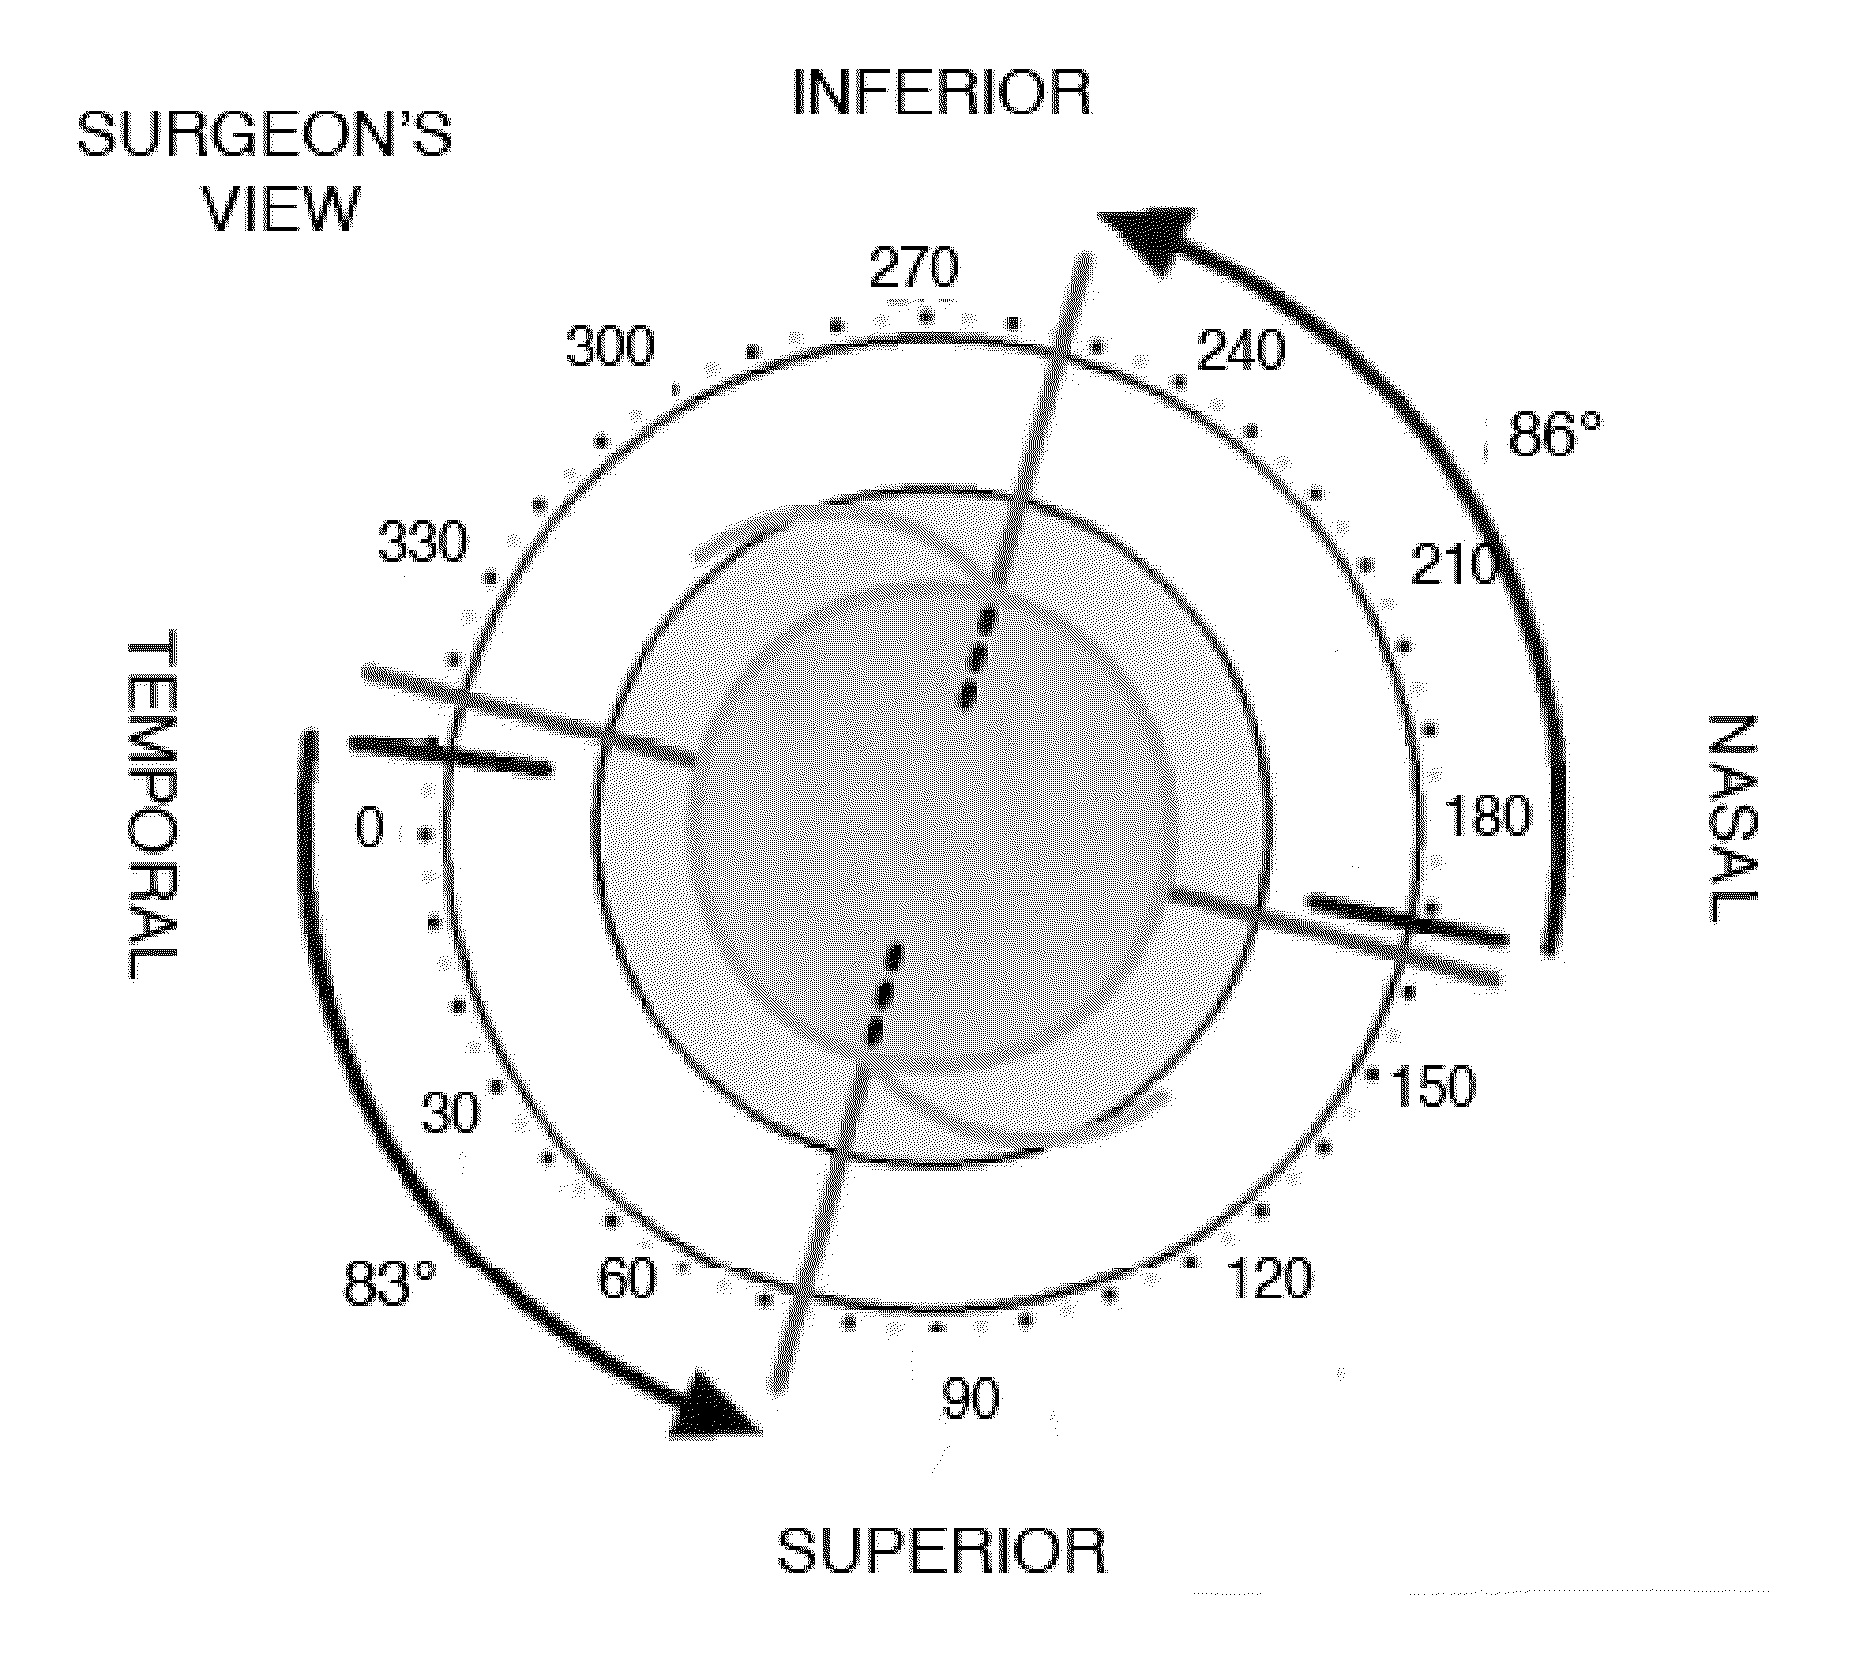 Tools and methods for the surgical placement of intraocular implants